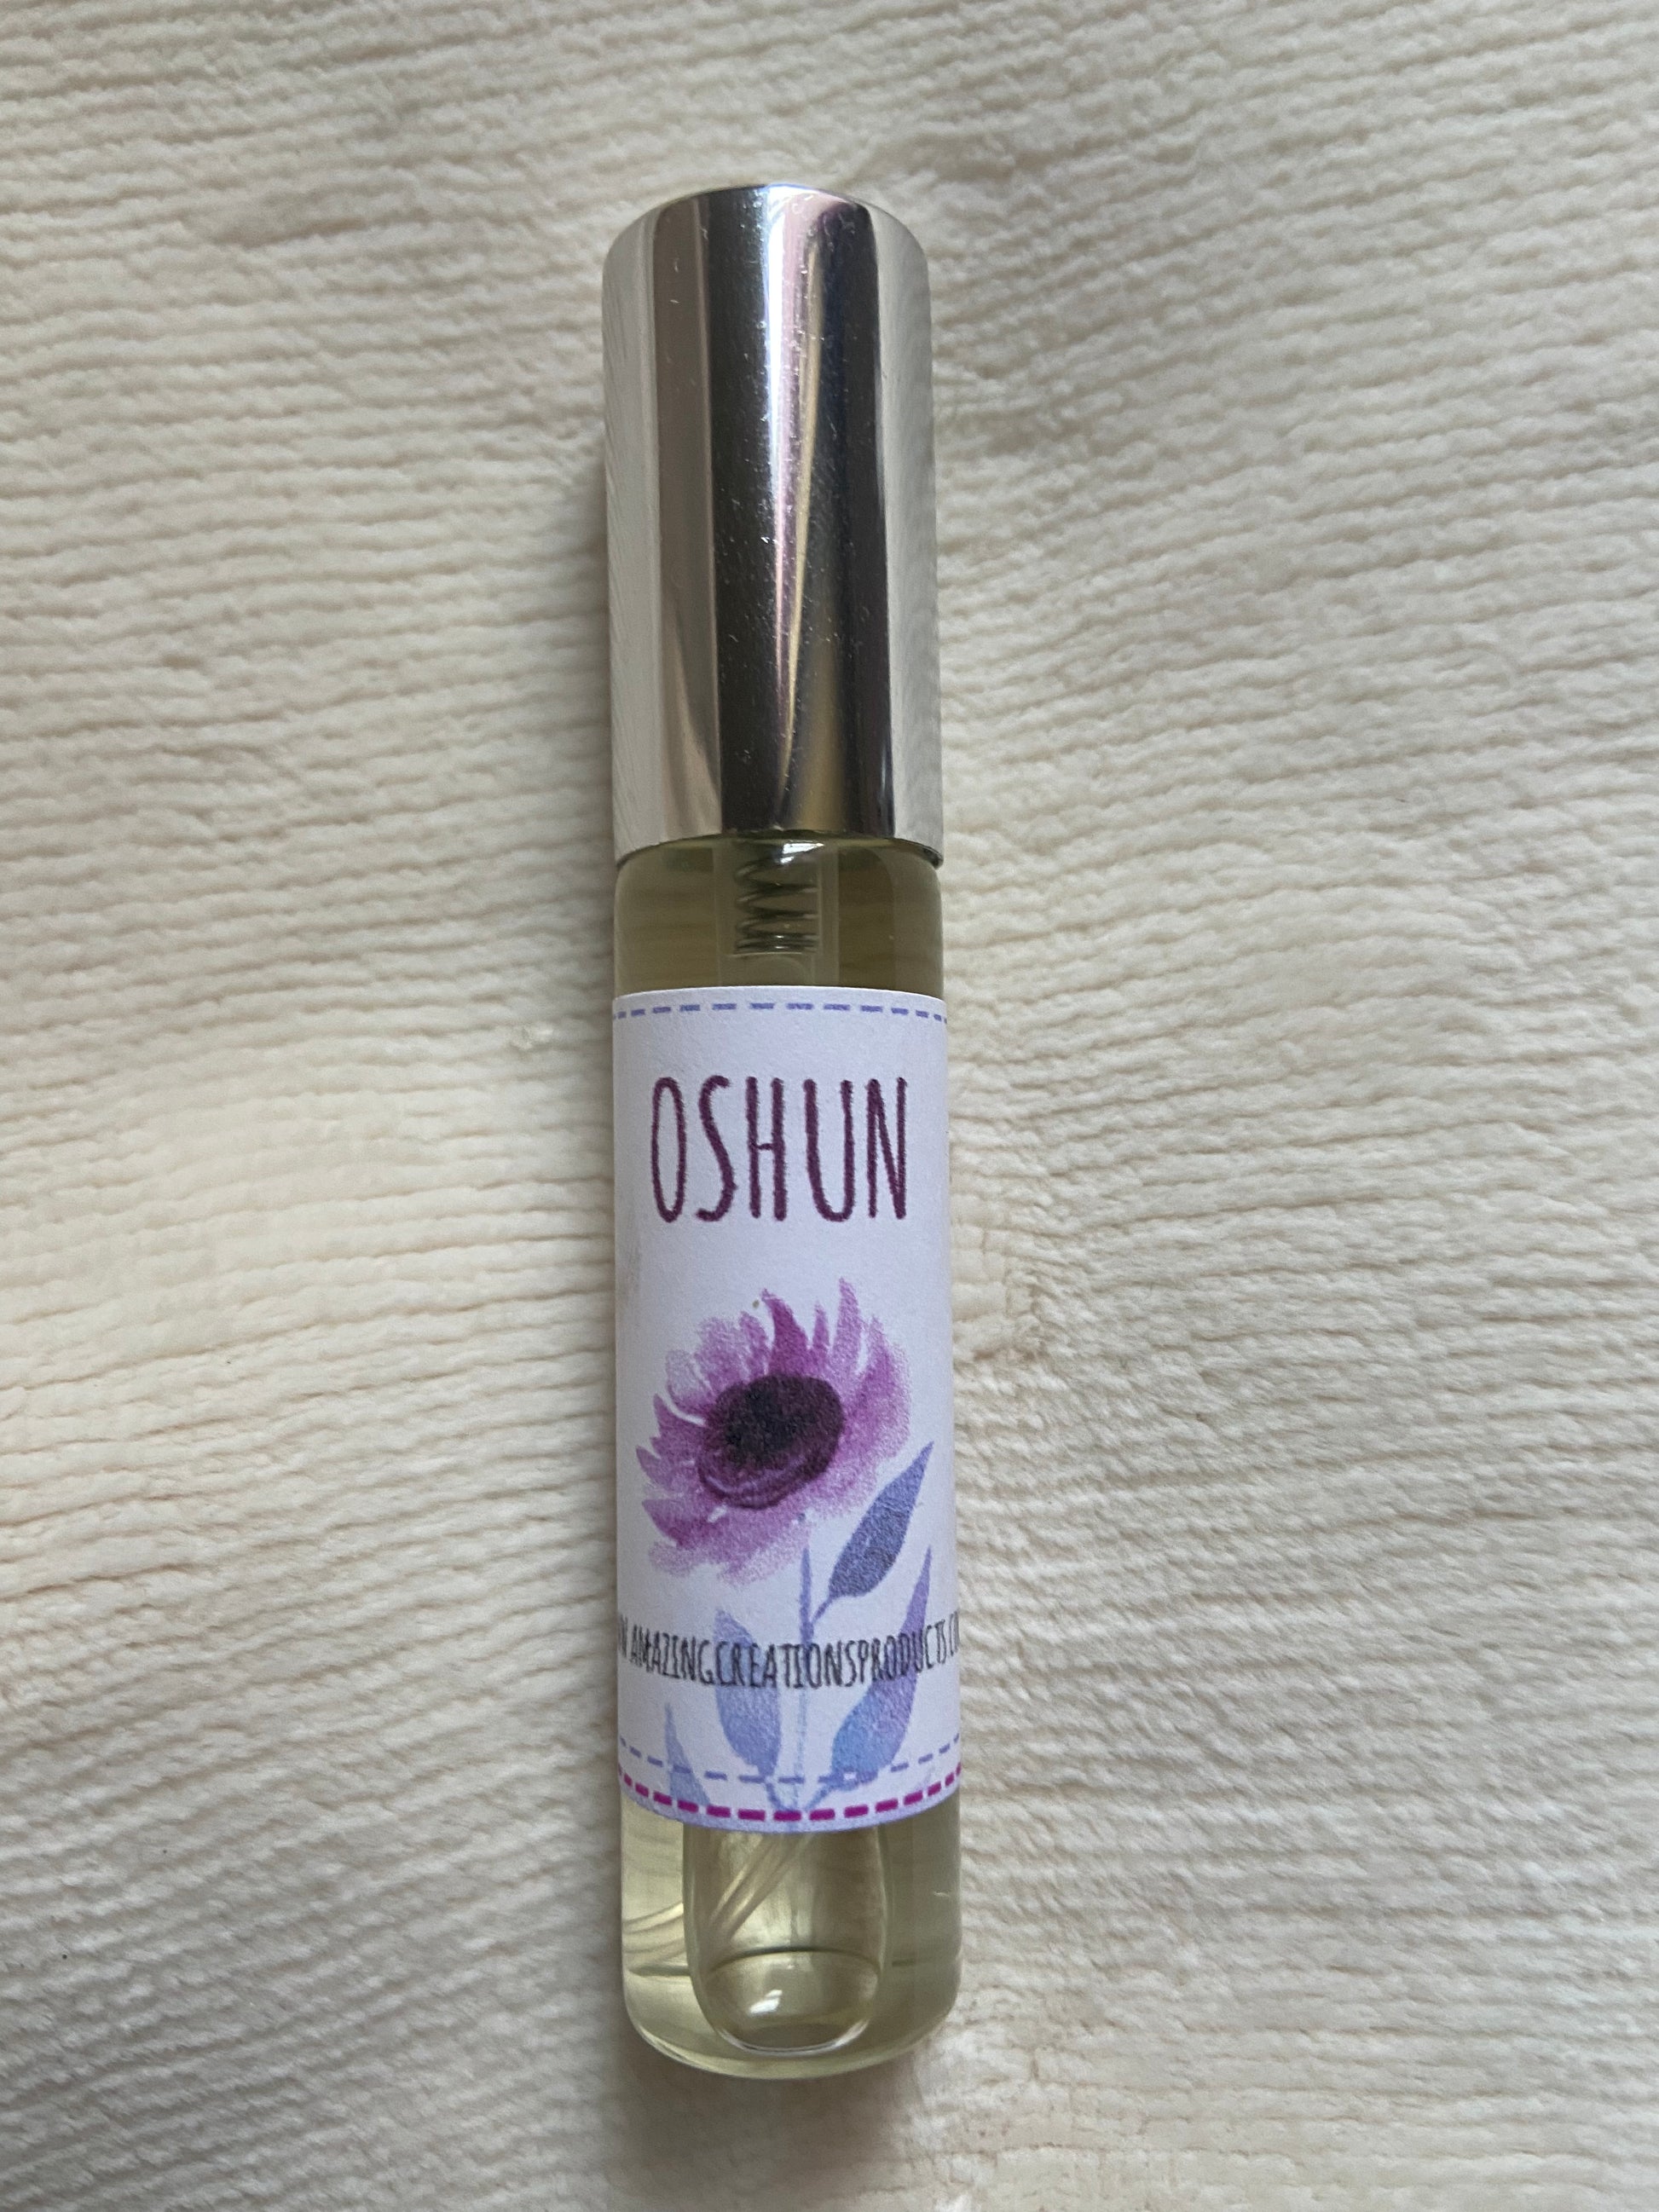  Oshun Perfume -  available at Amazing Creations Products . Grab yours for $3.00 today!